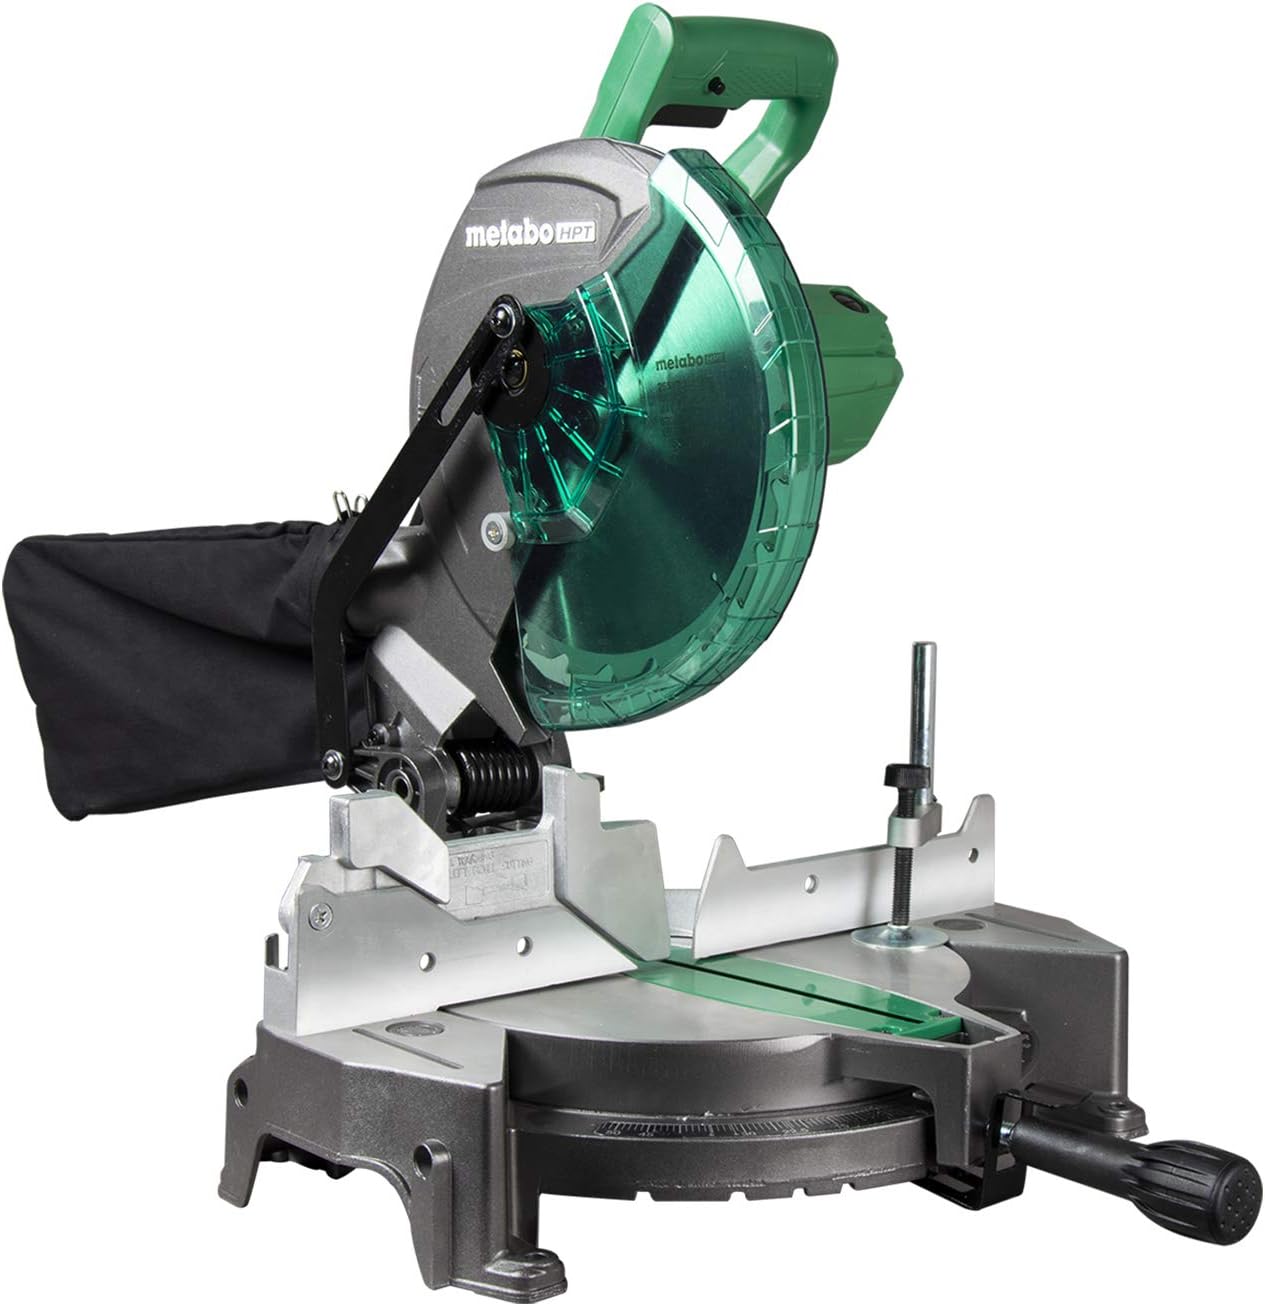 mitter saw review